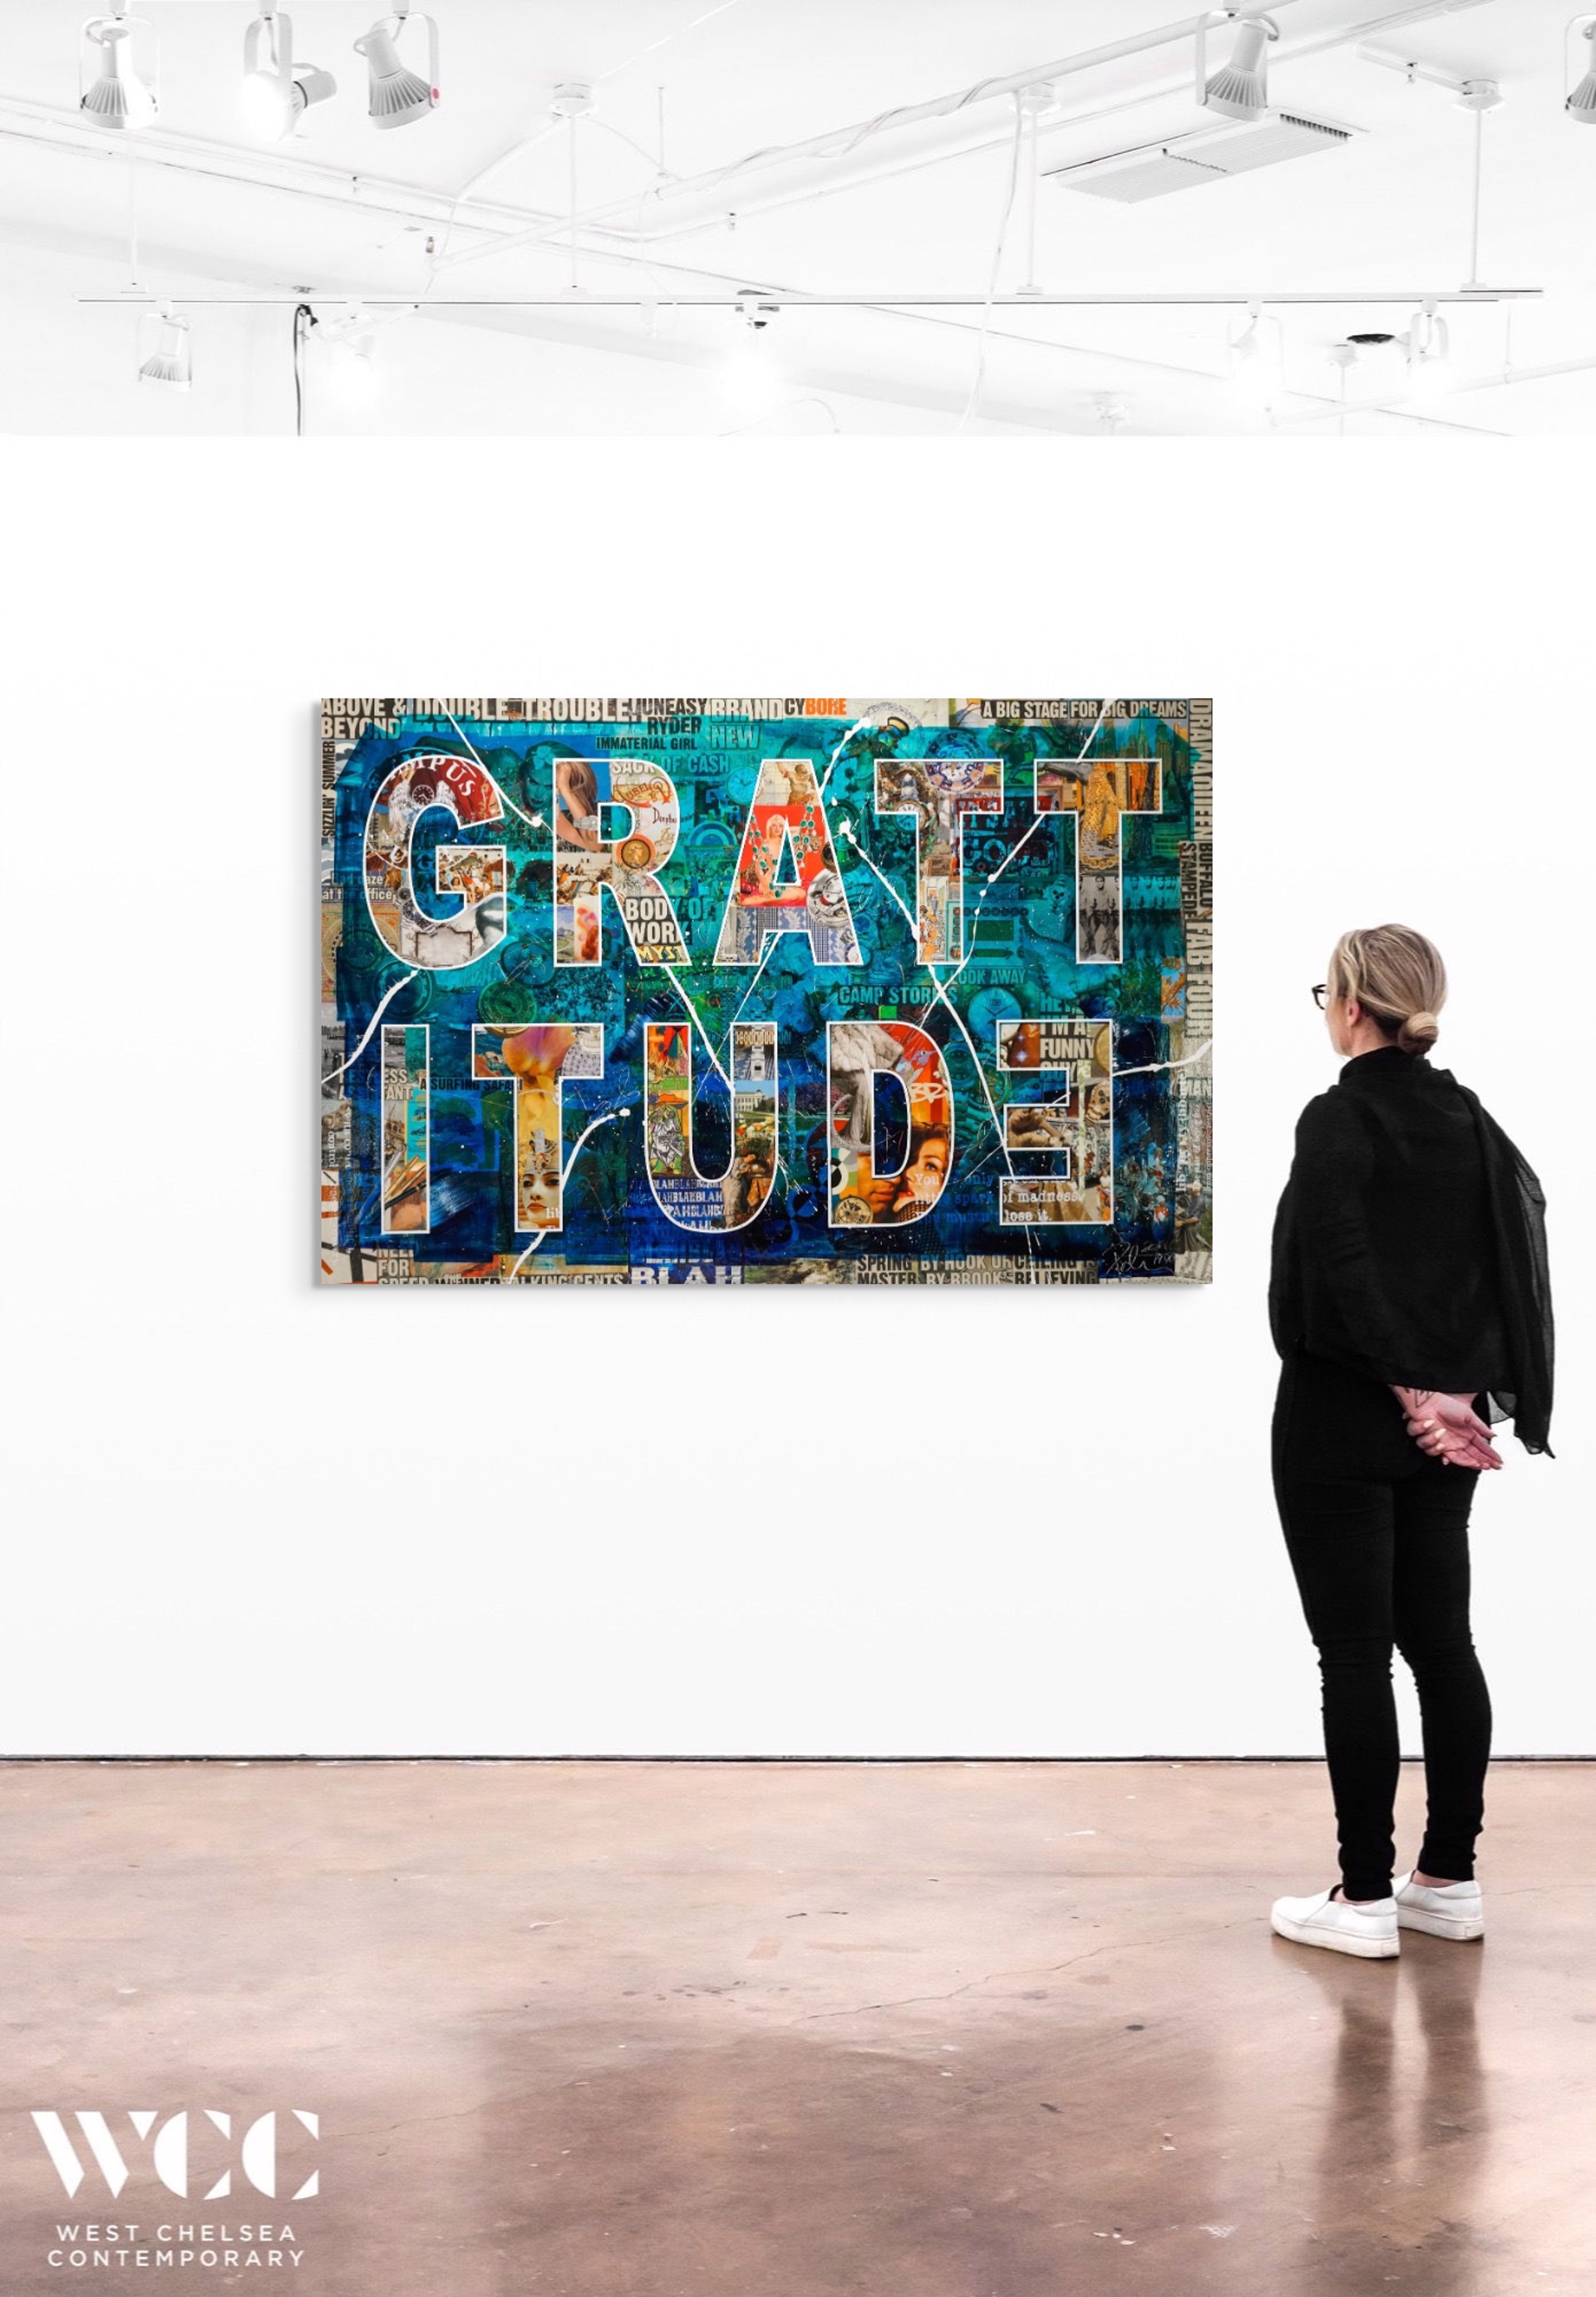 GRATTITUDE by Peter Tunney